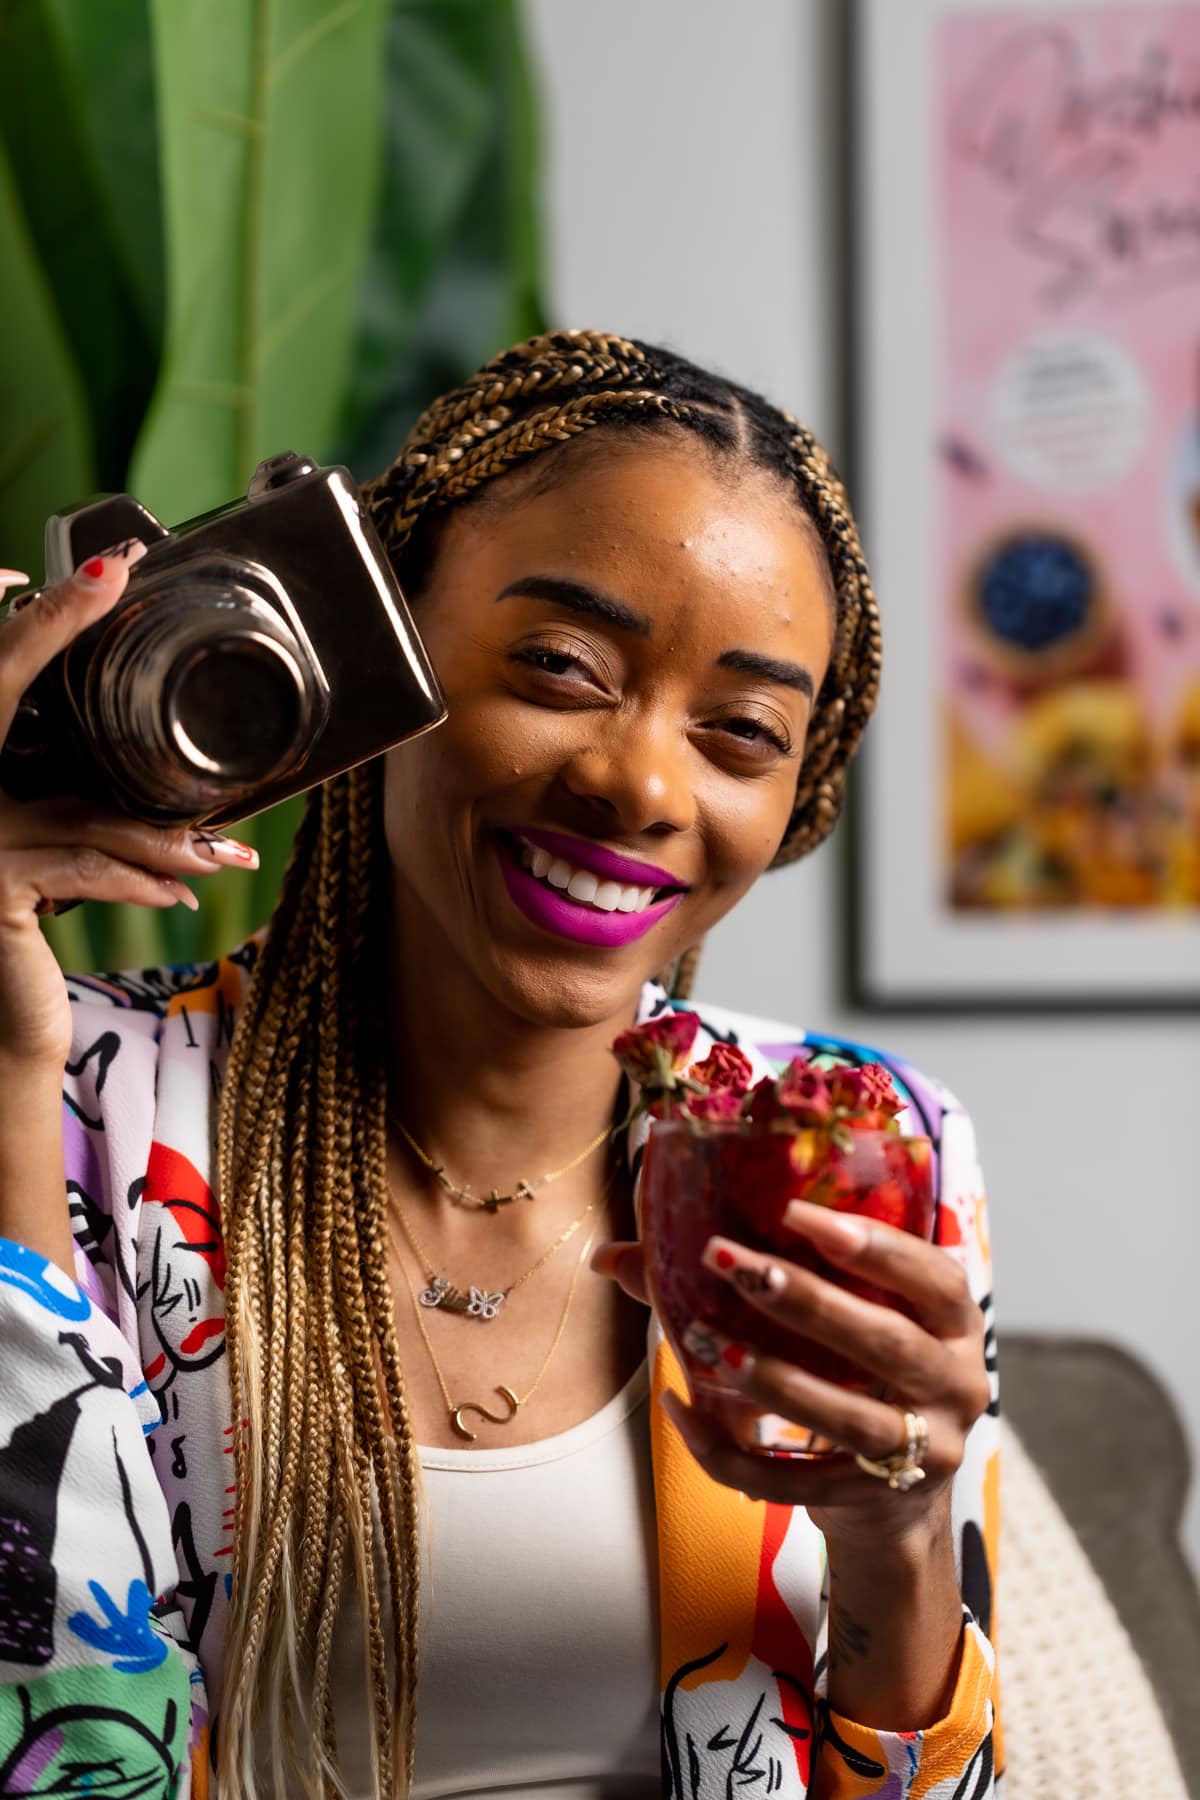 Shanika smiling with a camera and a red drink in her hand